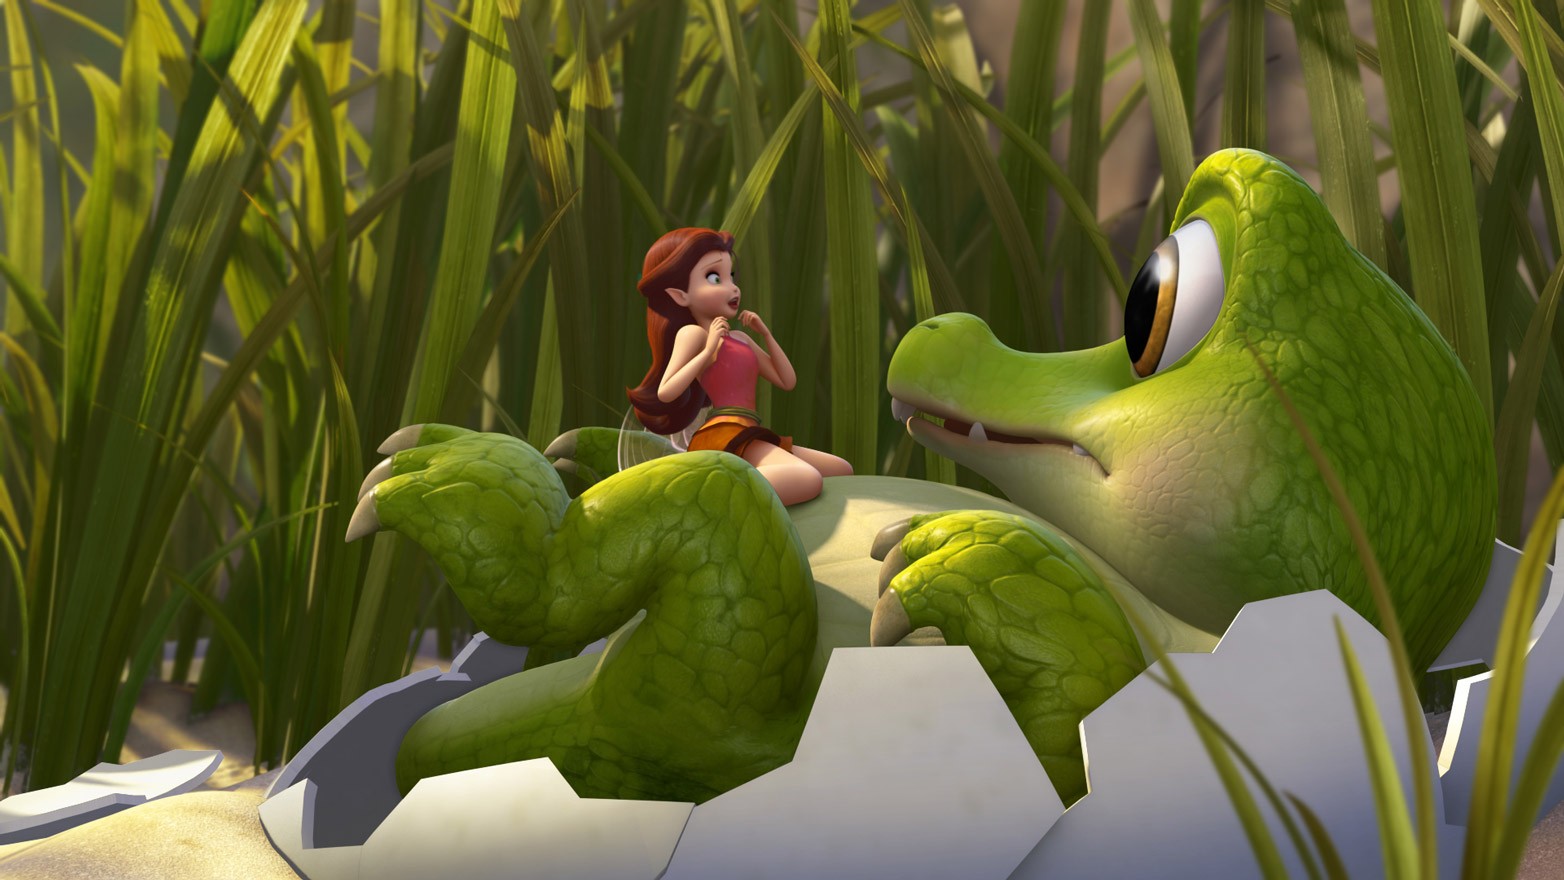 Rosetta and Crocky from Walt Disney Pictures' The Pirate Fairy (2014)